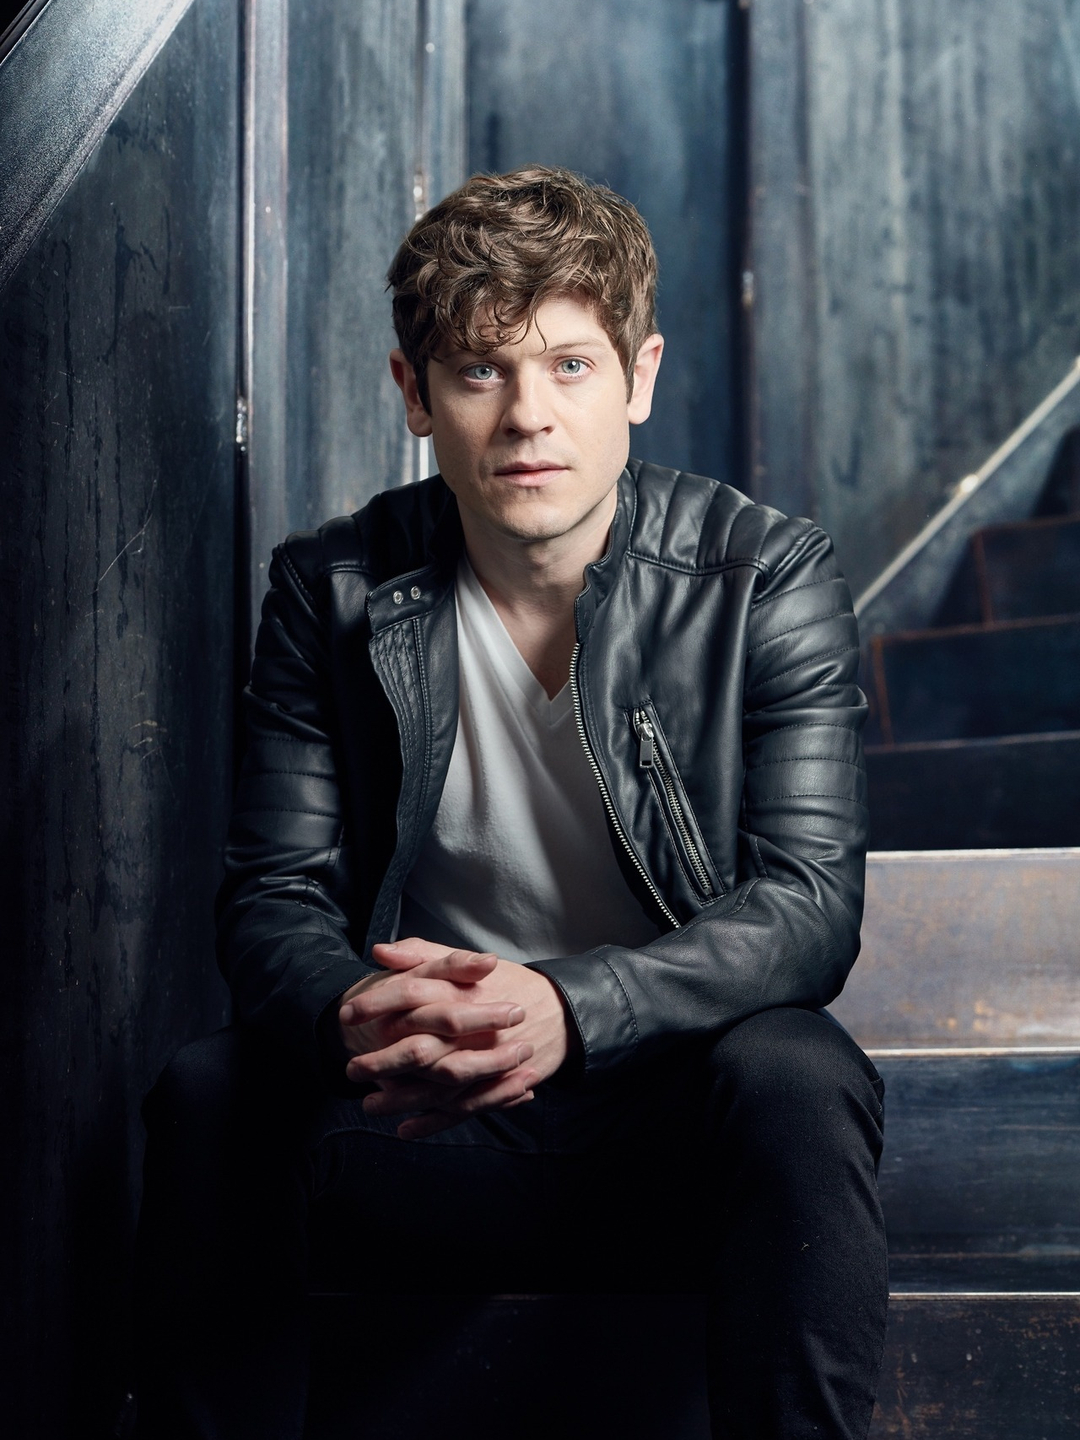 Iwan Rheon who are his parents